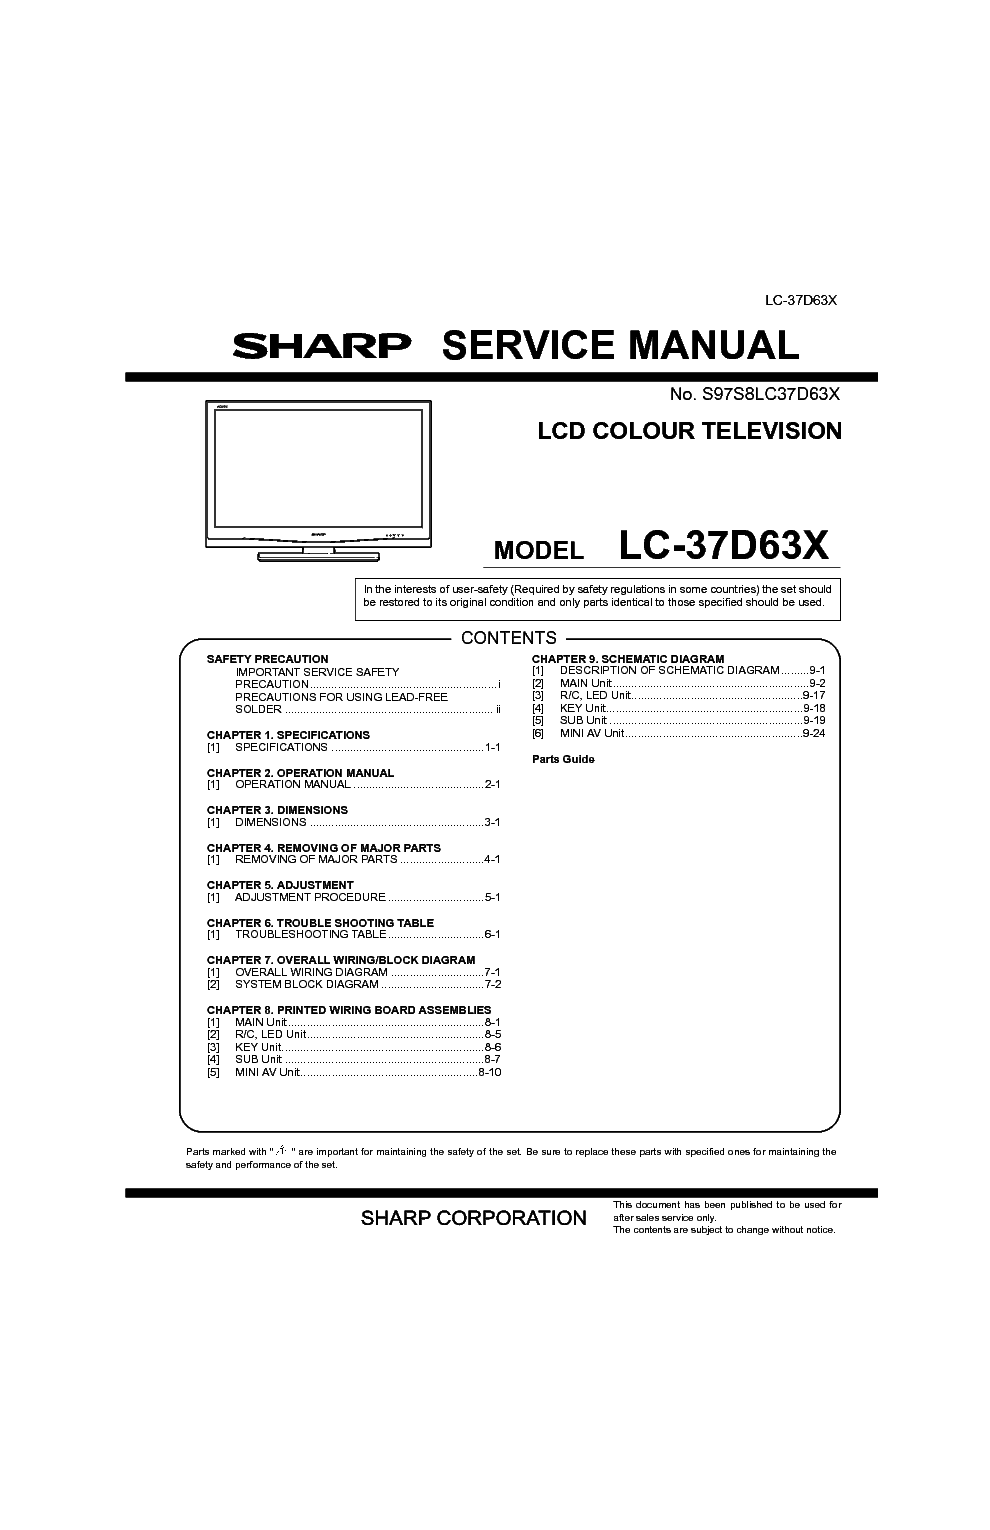 SHARP LC-37D63X service manual (1st page)